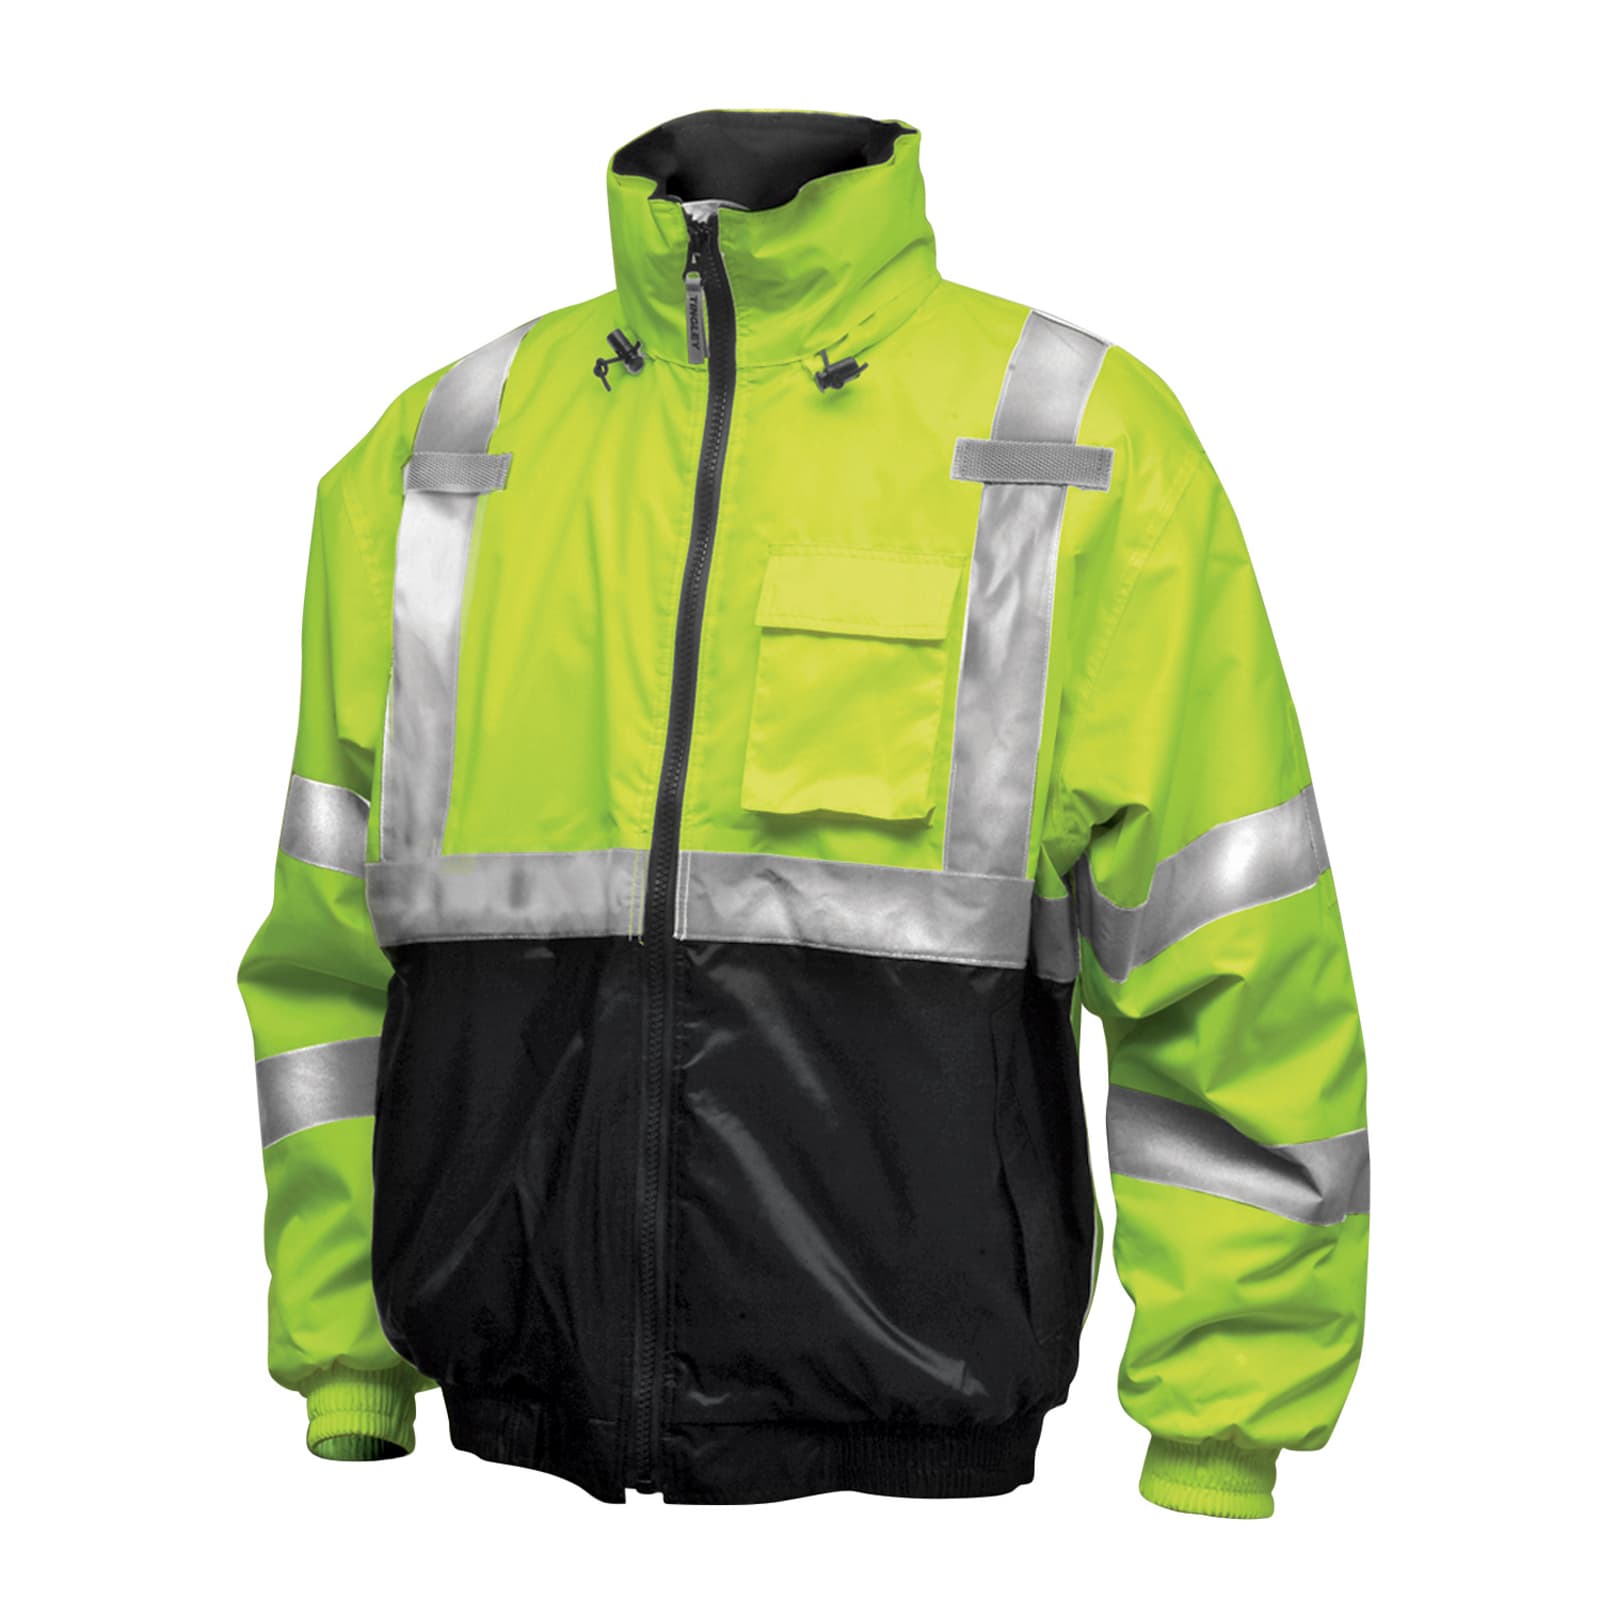 Men's Bomber II Yellow Class High Visibility Waterproof Insulated Jacket  by Job Sight at Fleet Farm